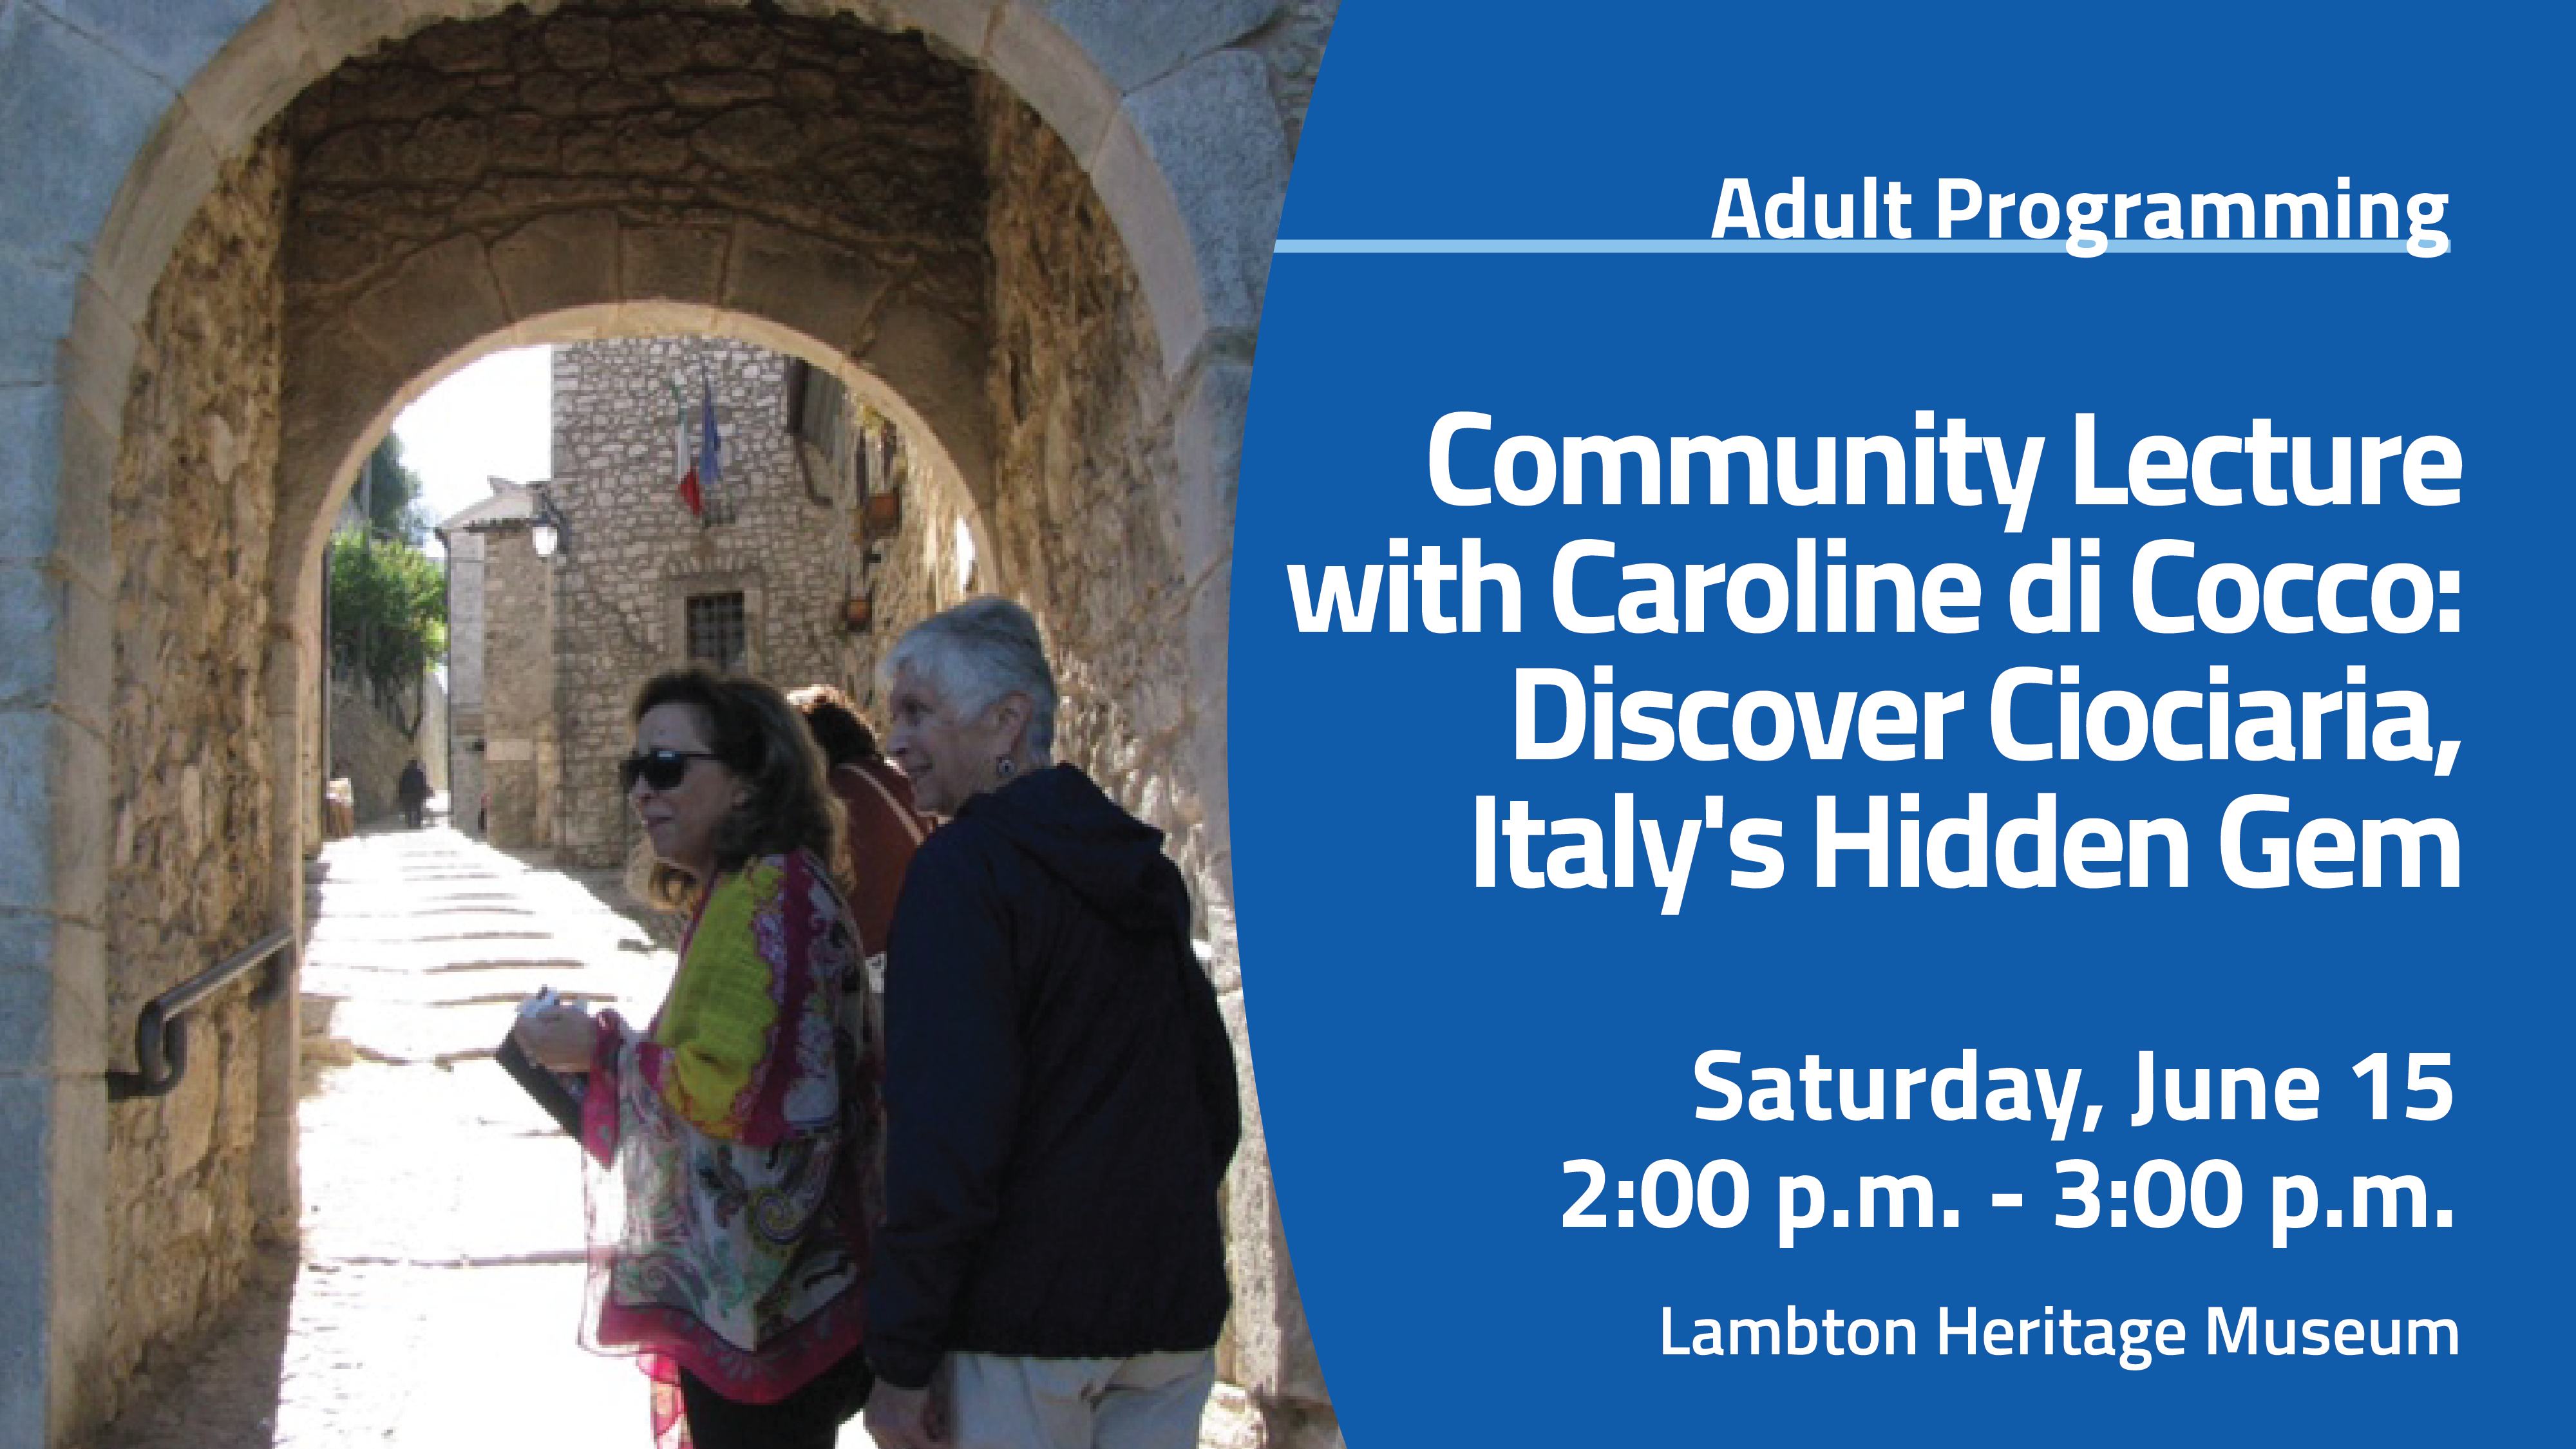 Promotional graphic for the Caroline Di Cocco Lecture on Discovering Ciociaria, Italy's Hidden Gem